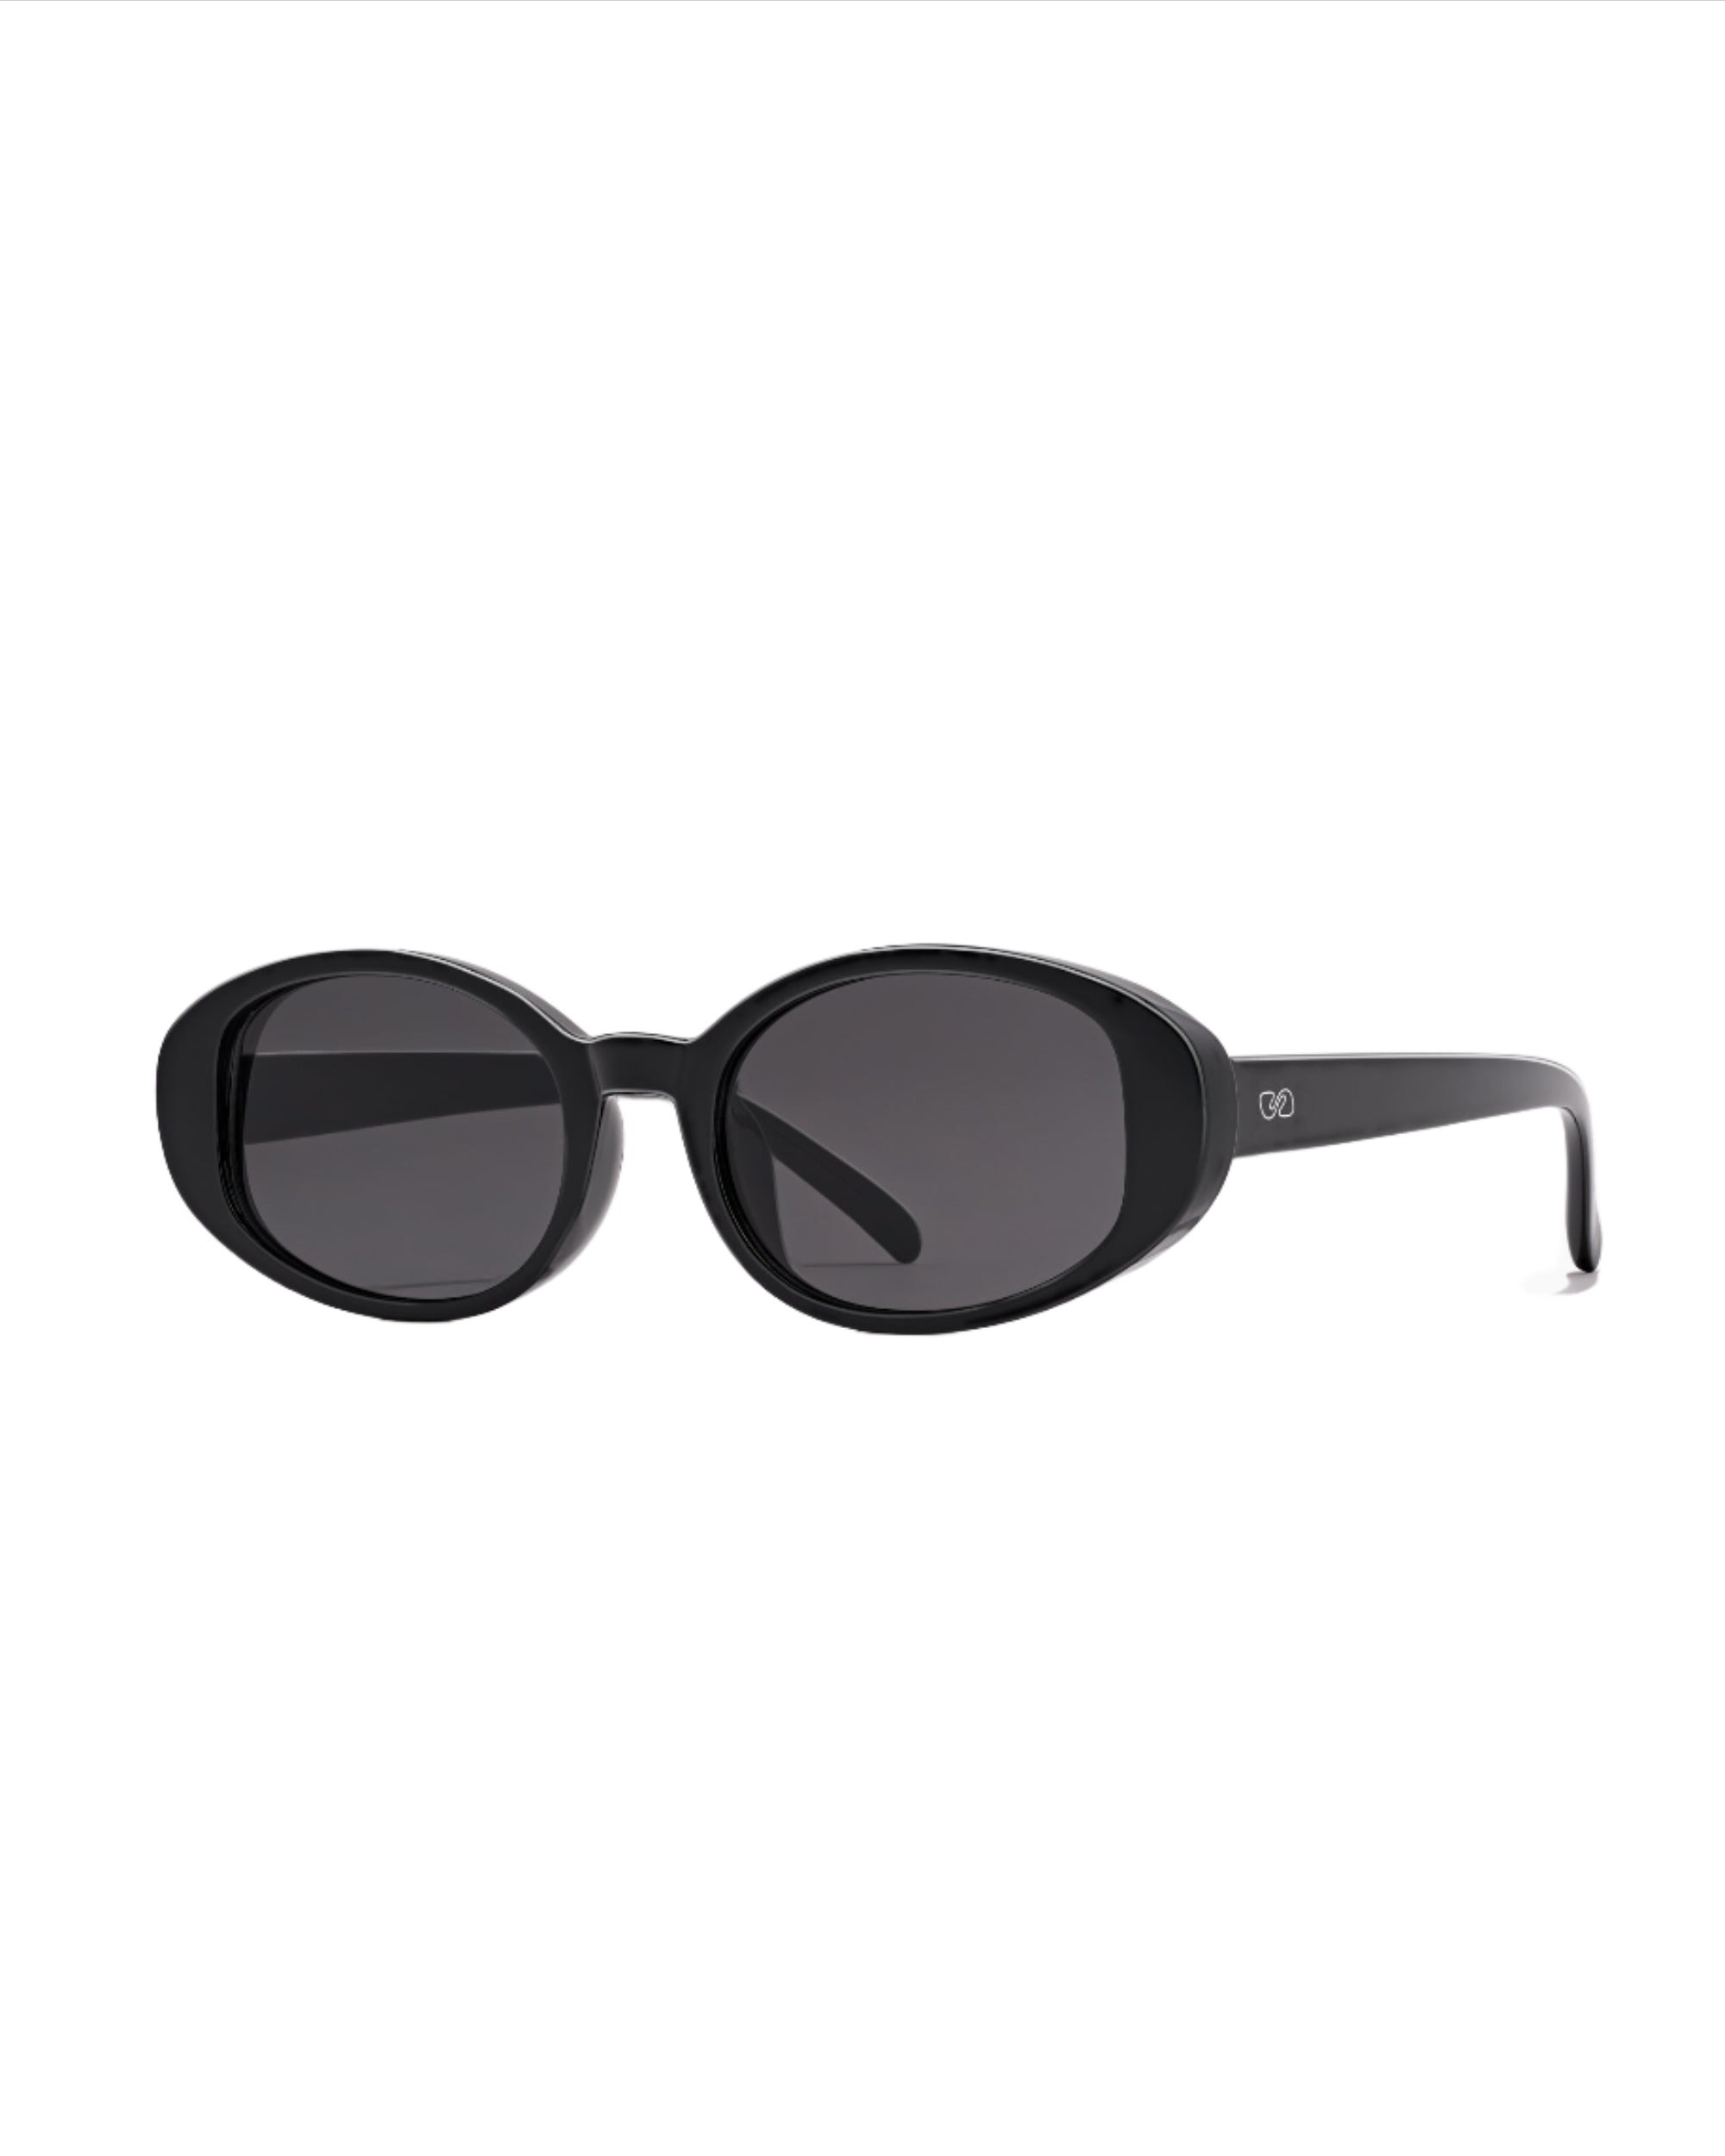 DOWNTOWN - BLACK INK SUNGLASSES